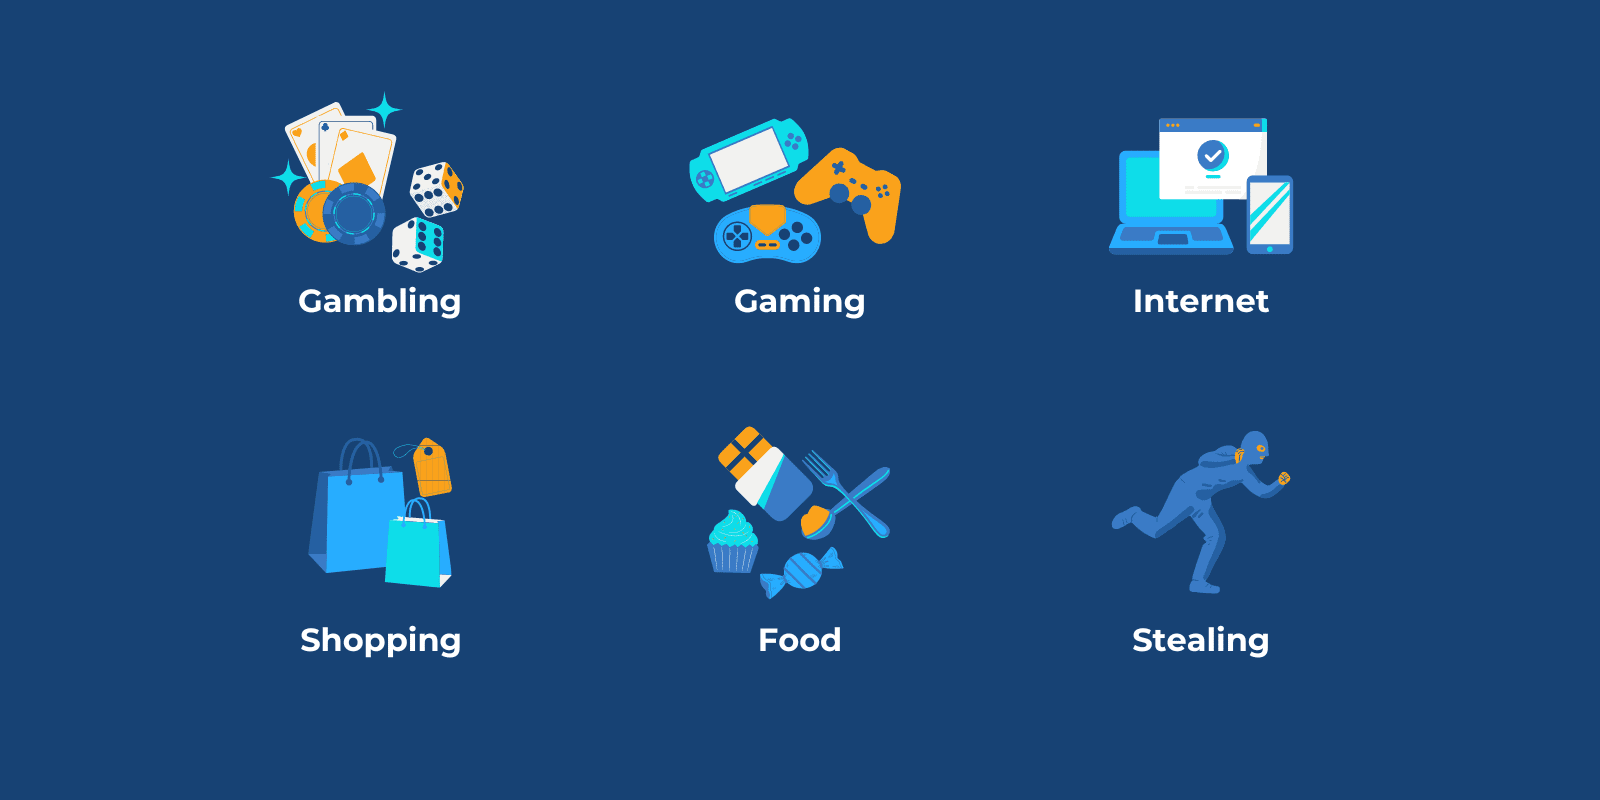 Gambling, gaming, internet, shopping food, and stealing represented with relevant icons